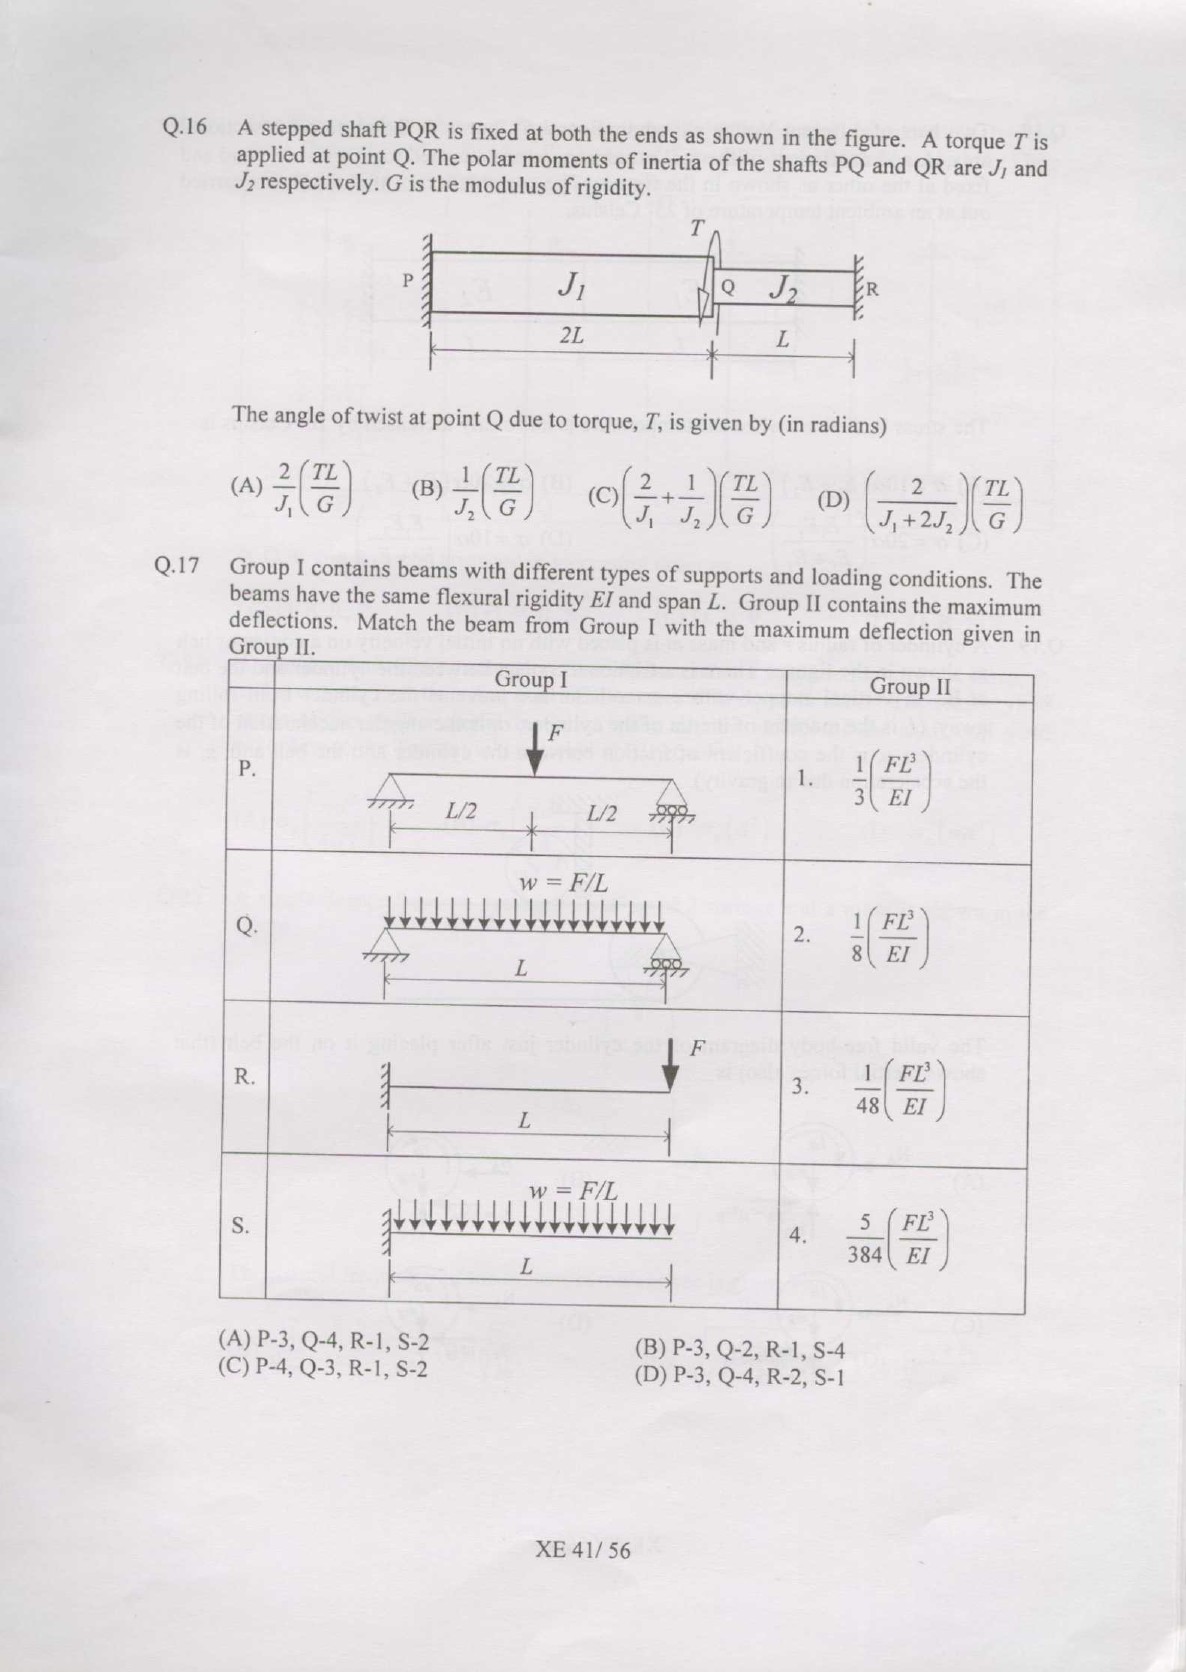 GATE Exam Question Paper 2007 Engineering Sciences 41